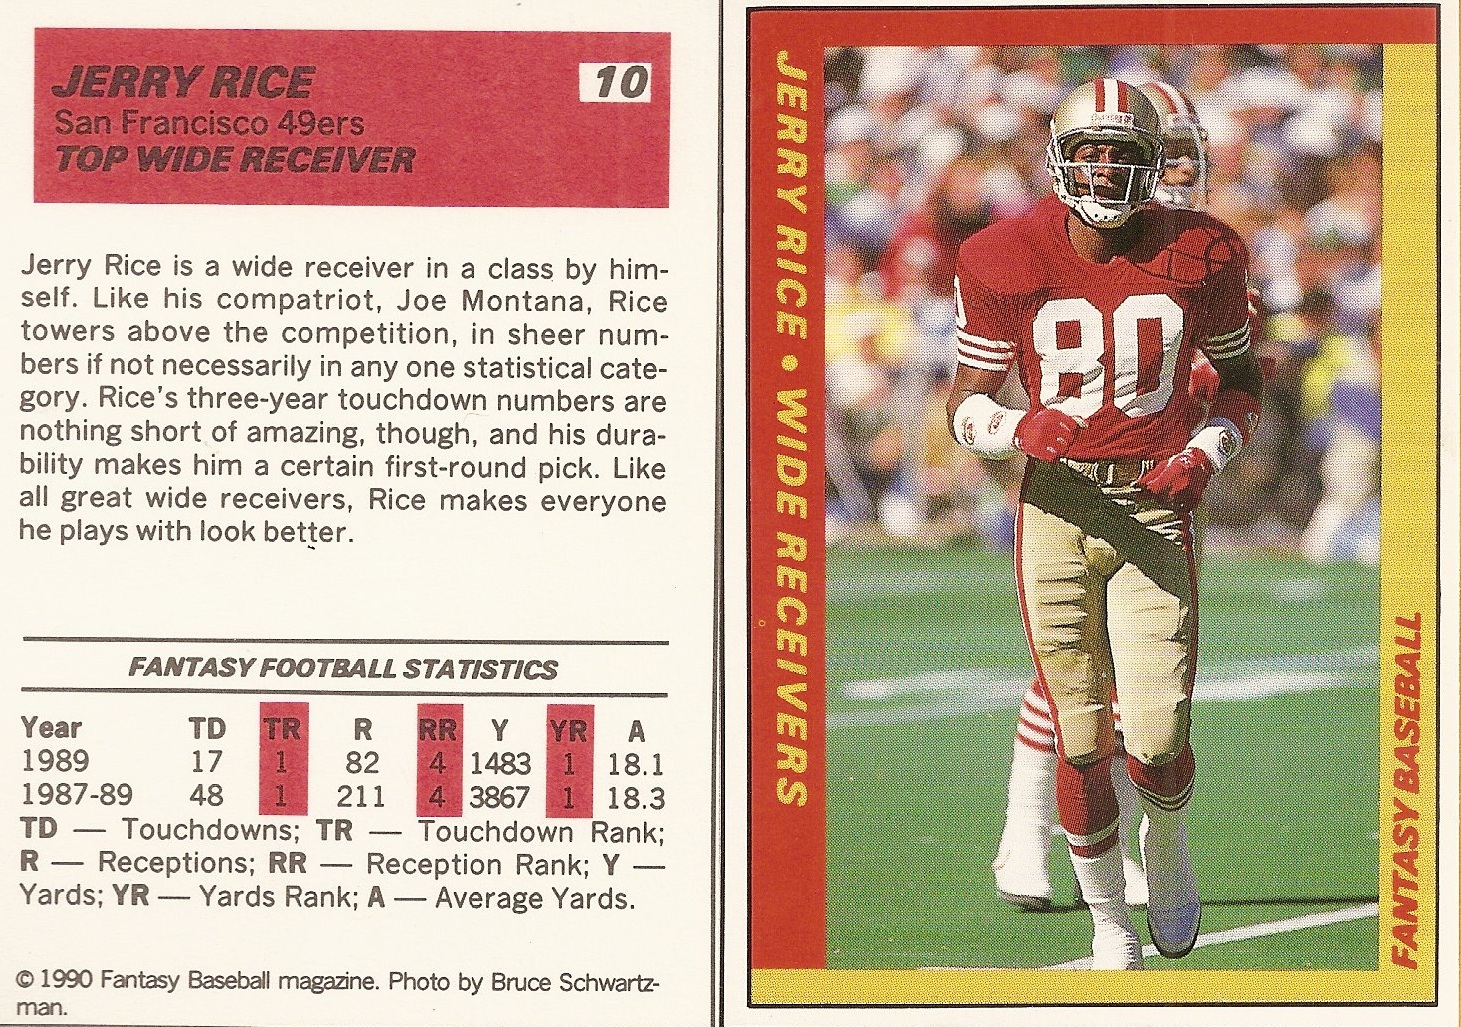 1987 JERRY RICE San Francisco 49ers FOOTBALL ACTION Glossy Photo 8x10 PICTURE! 